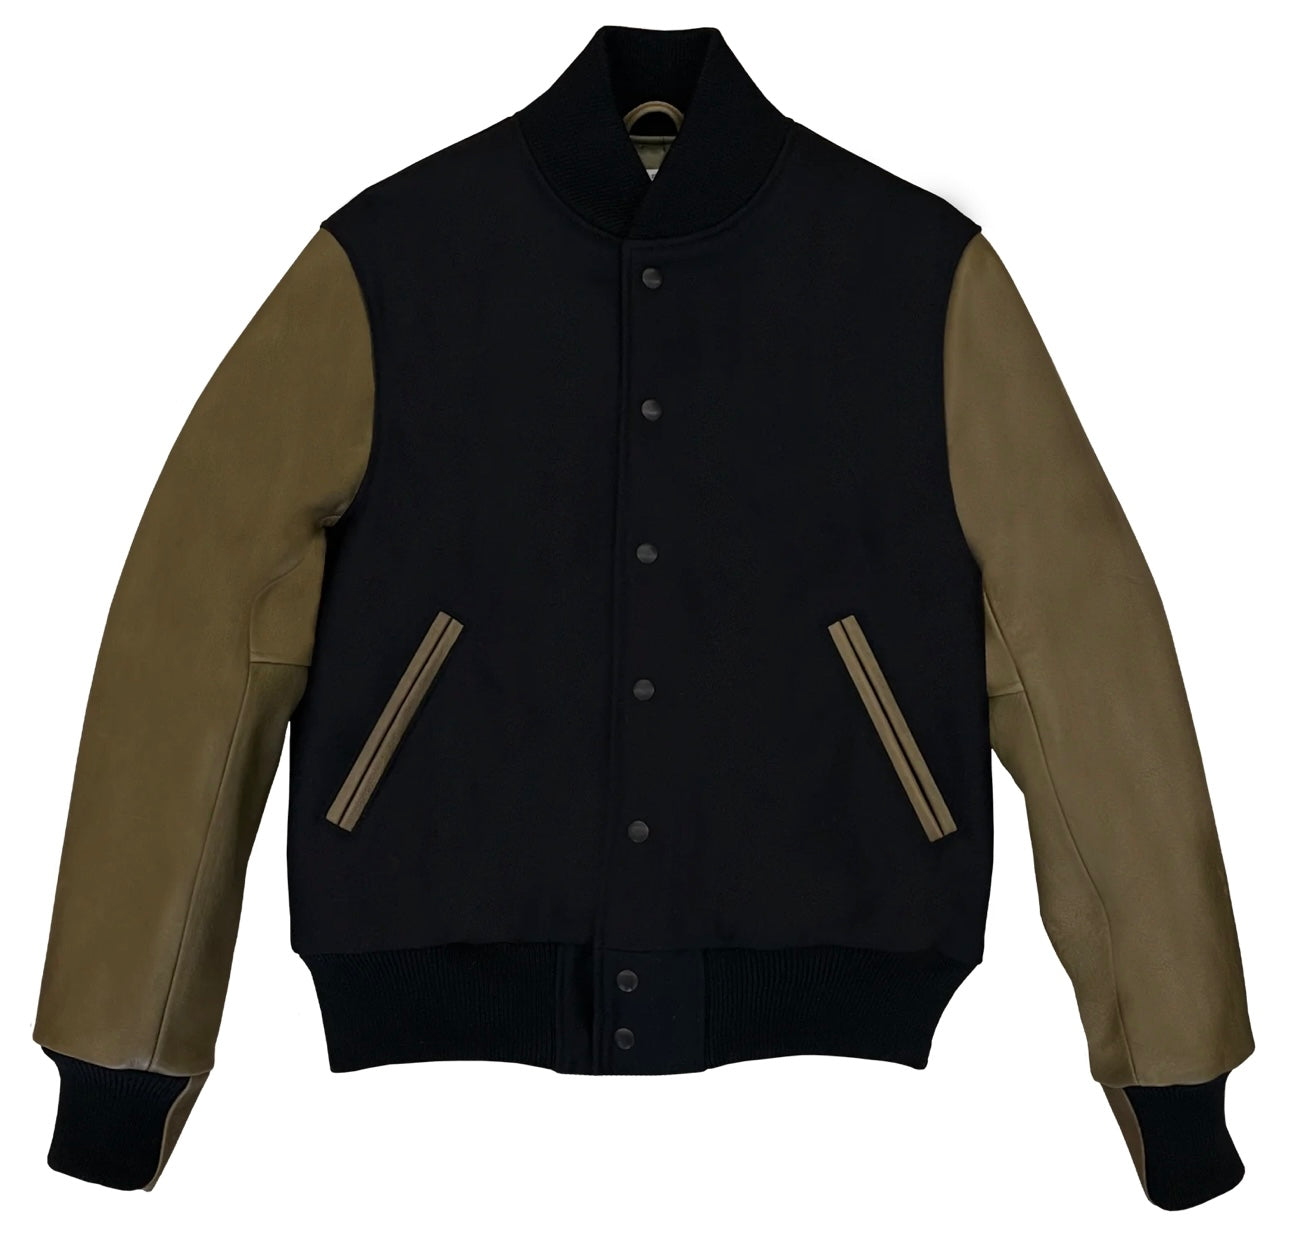 R P LUXURY VARSITY JACKET / BLACK WOOL / OLIVE LEATHER / HAND MADE IN USA / XS TO 3-XL